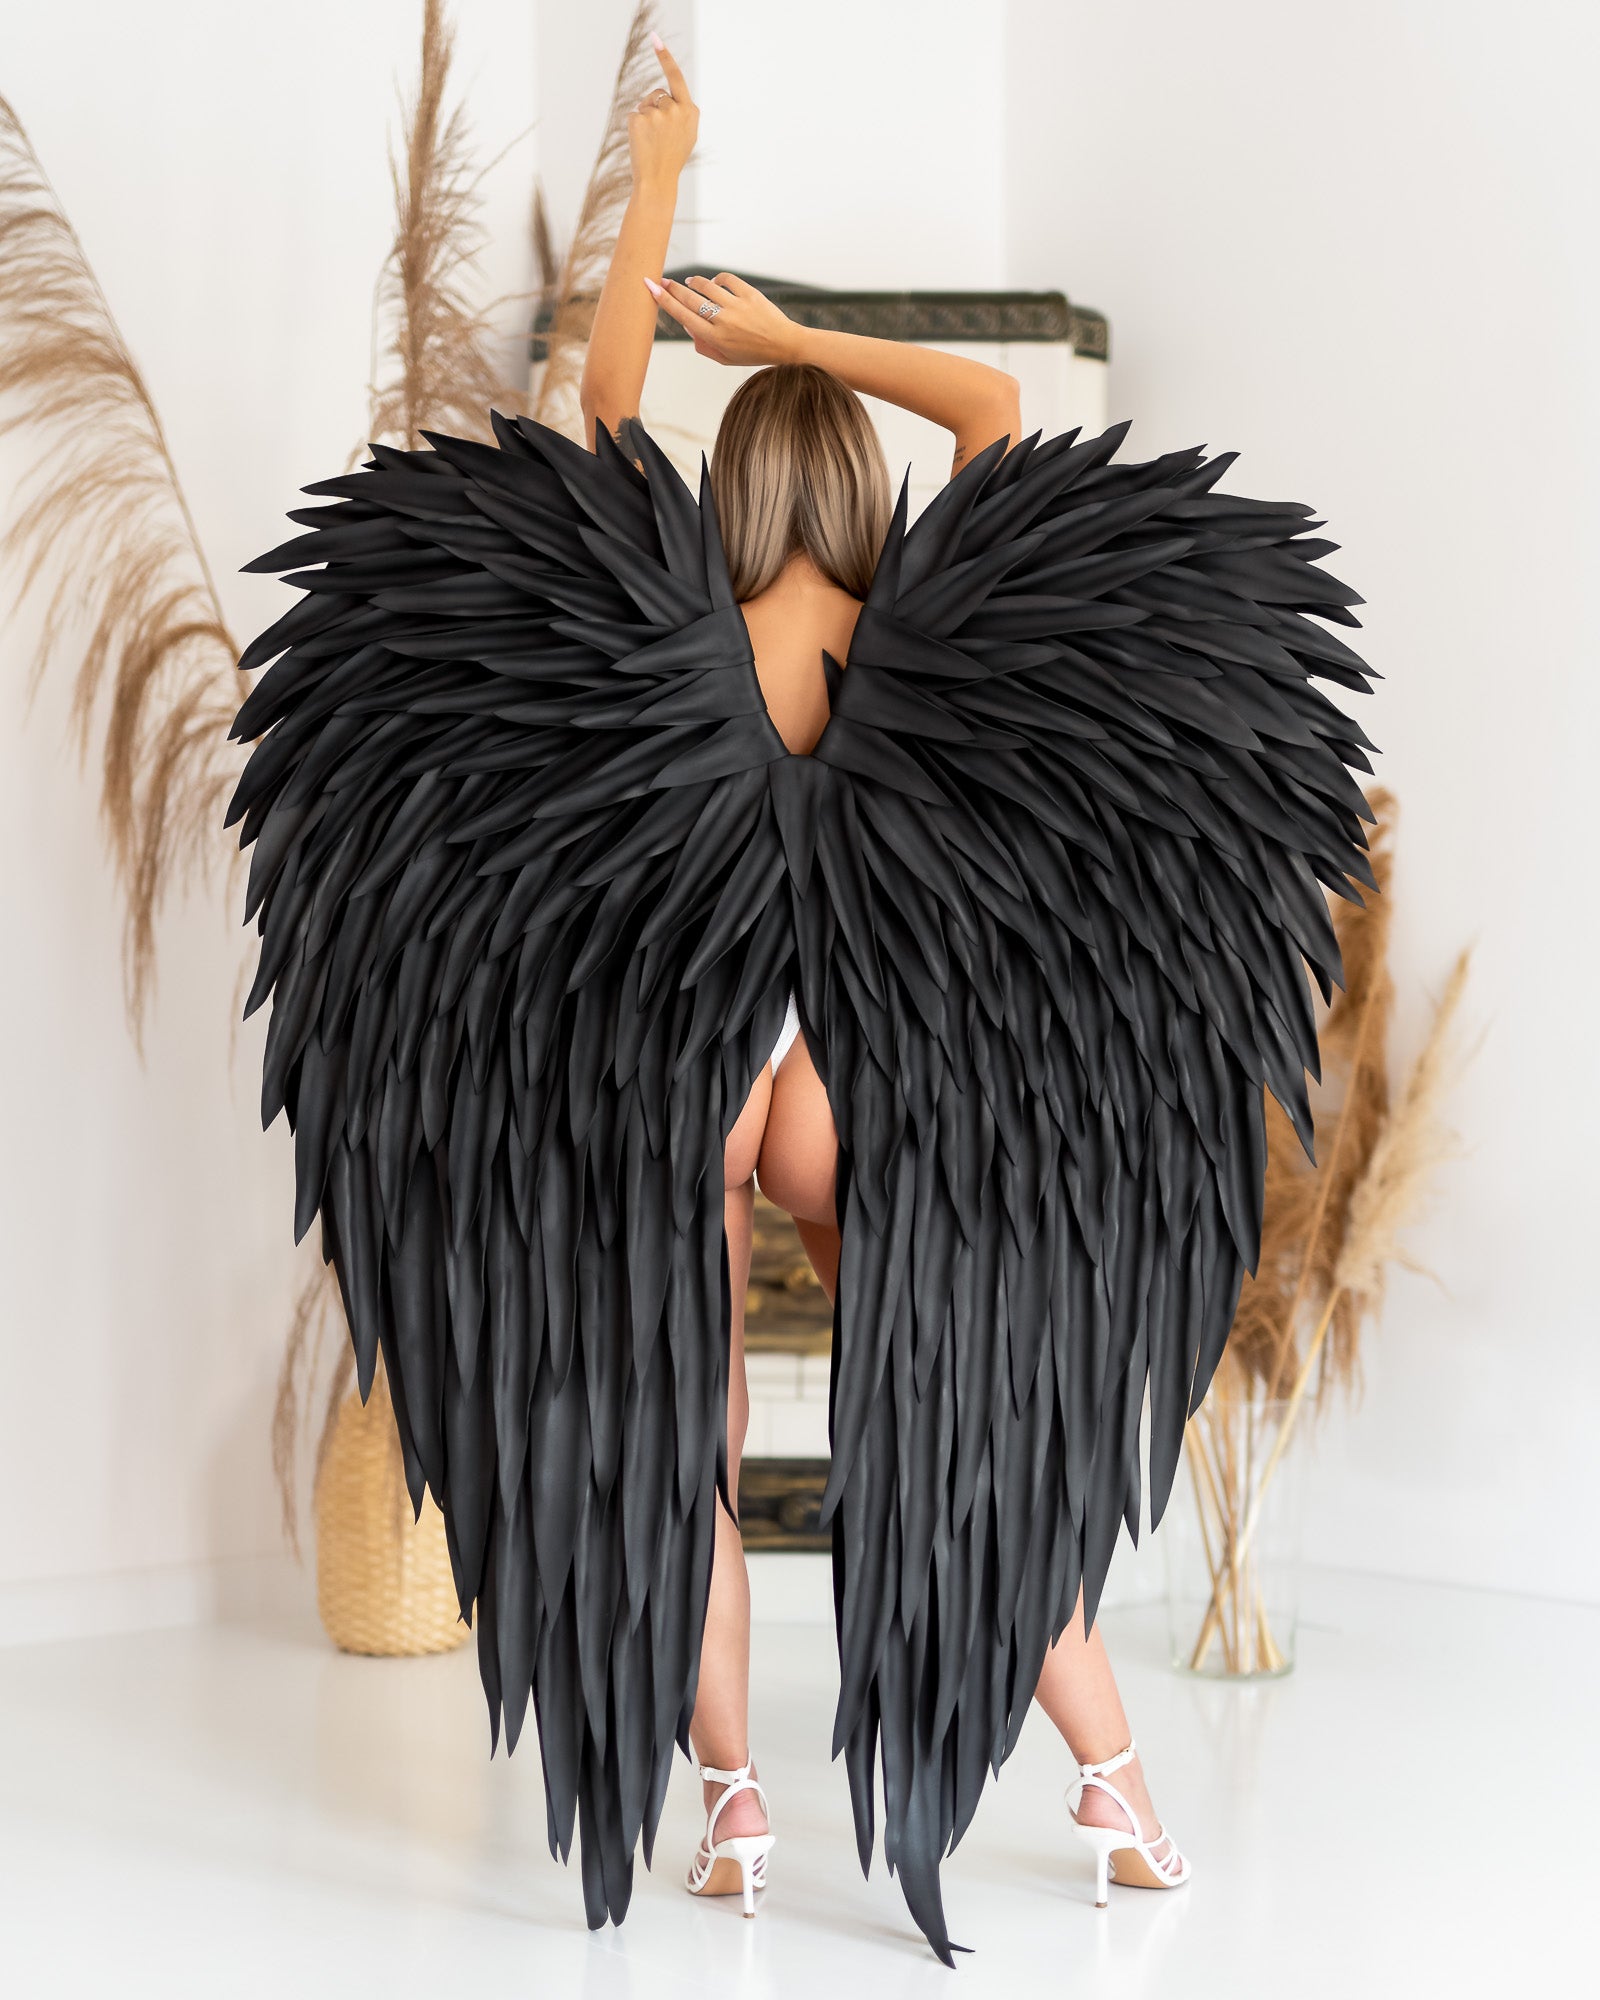 Black Angel Wings Cosplay Sexy Costume for a photo shoot – Bogacci